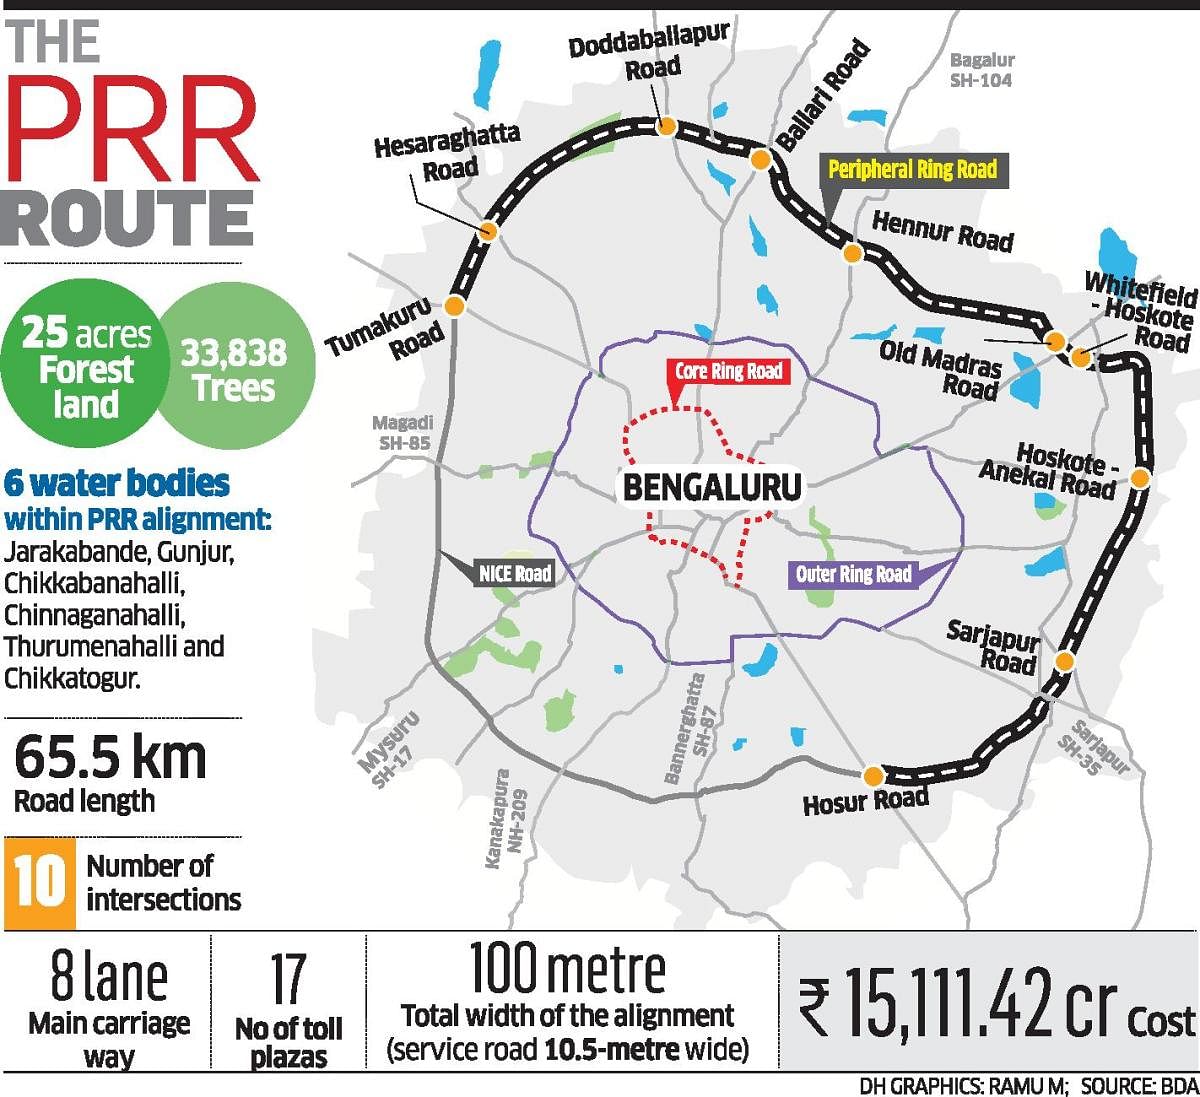 Peripheral Ring Road Plan Criticized: No Service Roads for Mobility,